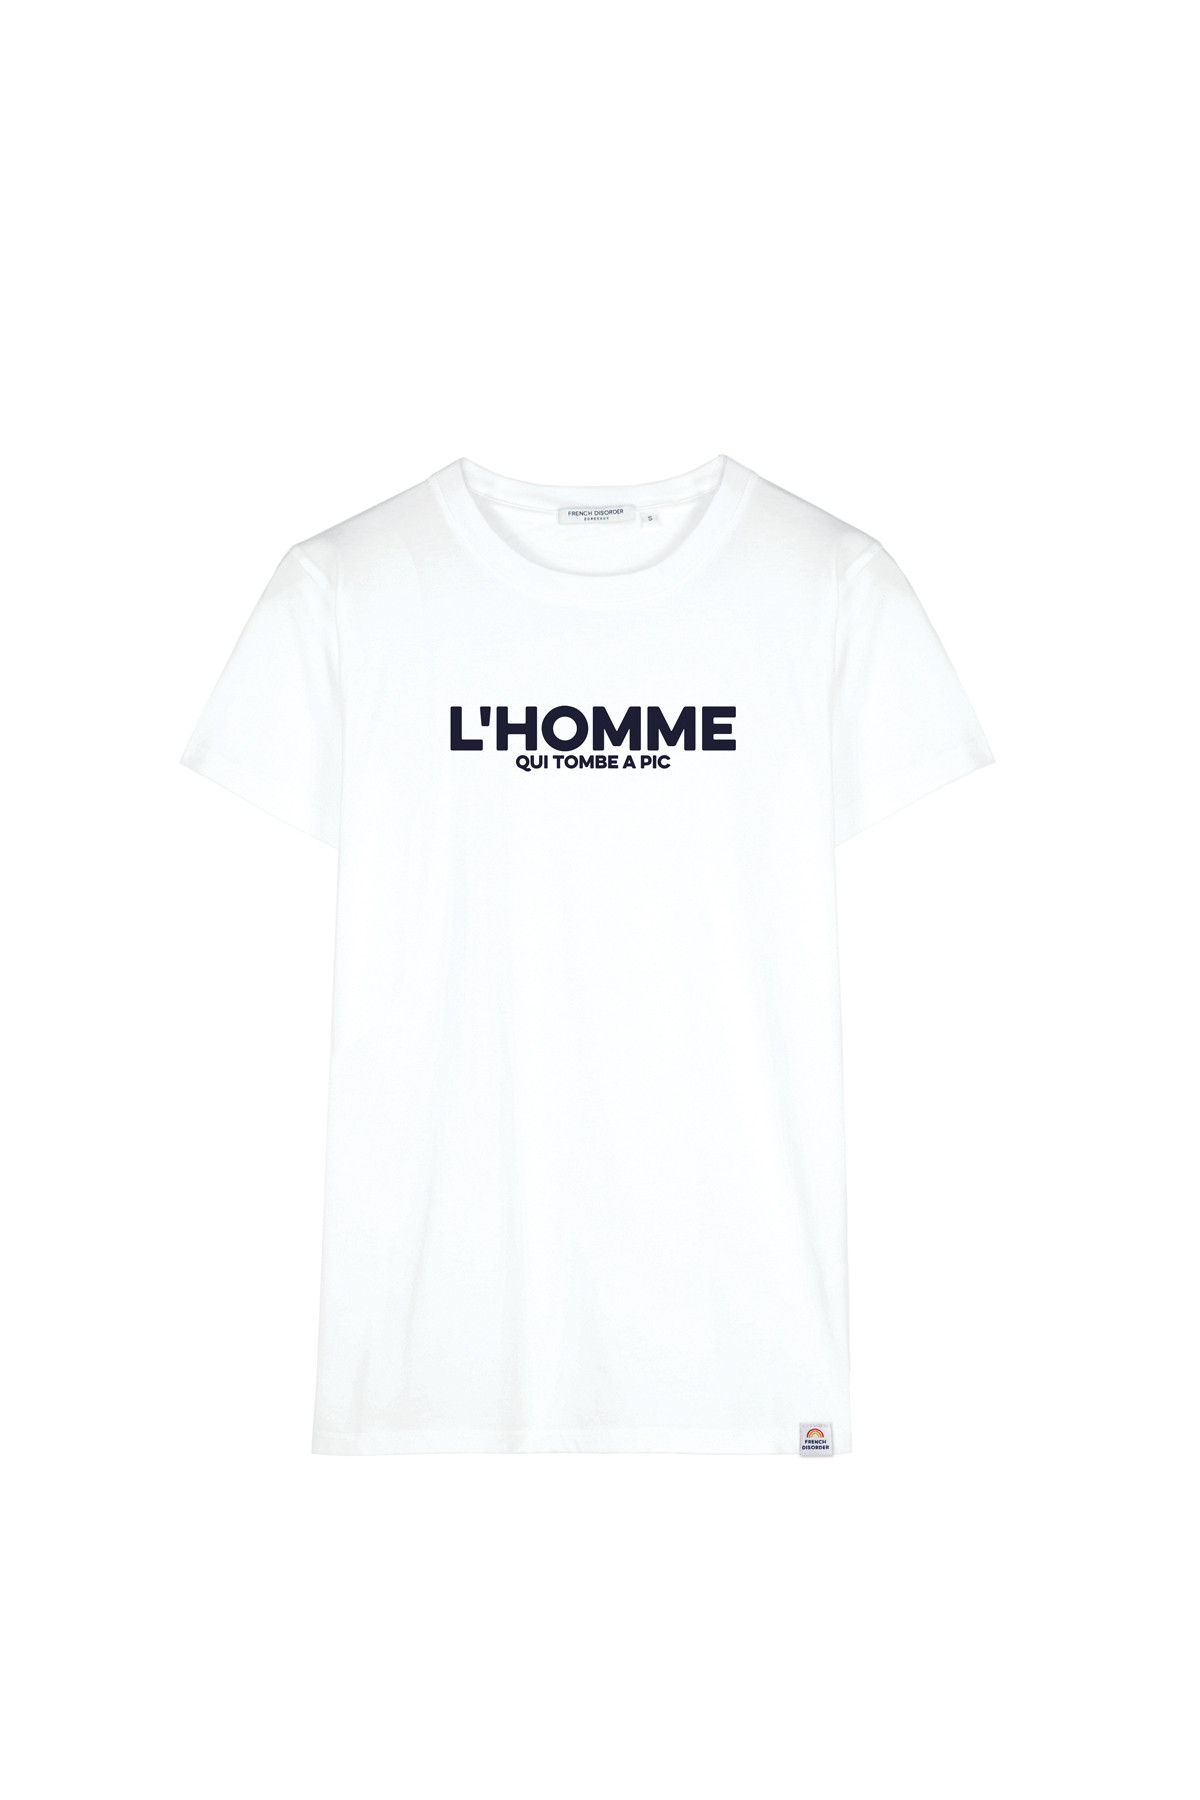 T-shirt L'HOMME QUI TOMBE A PIC French Disorder